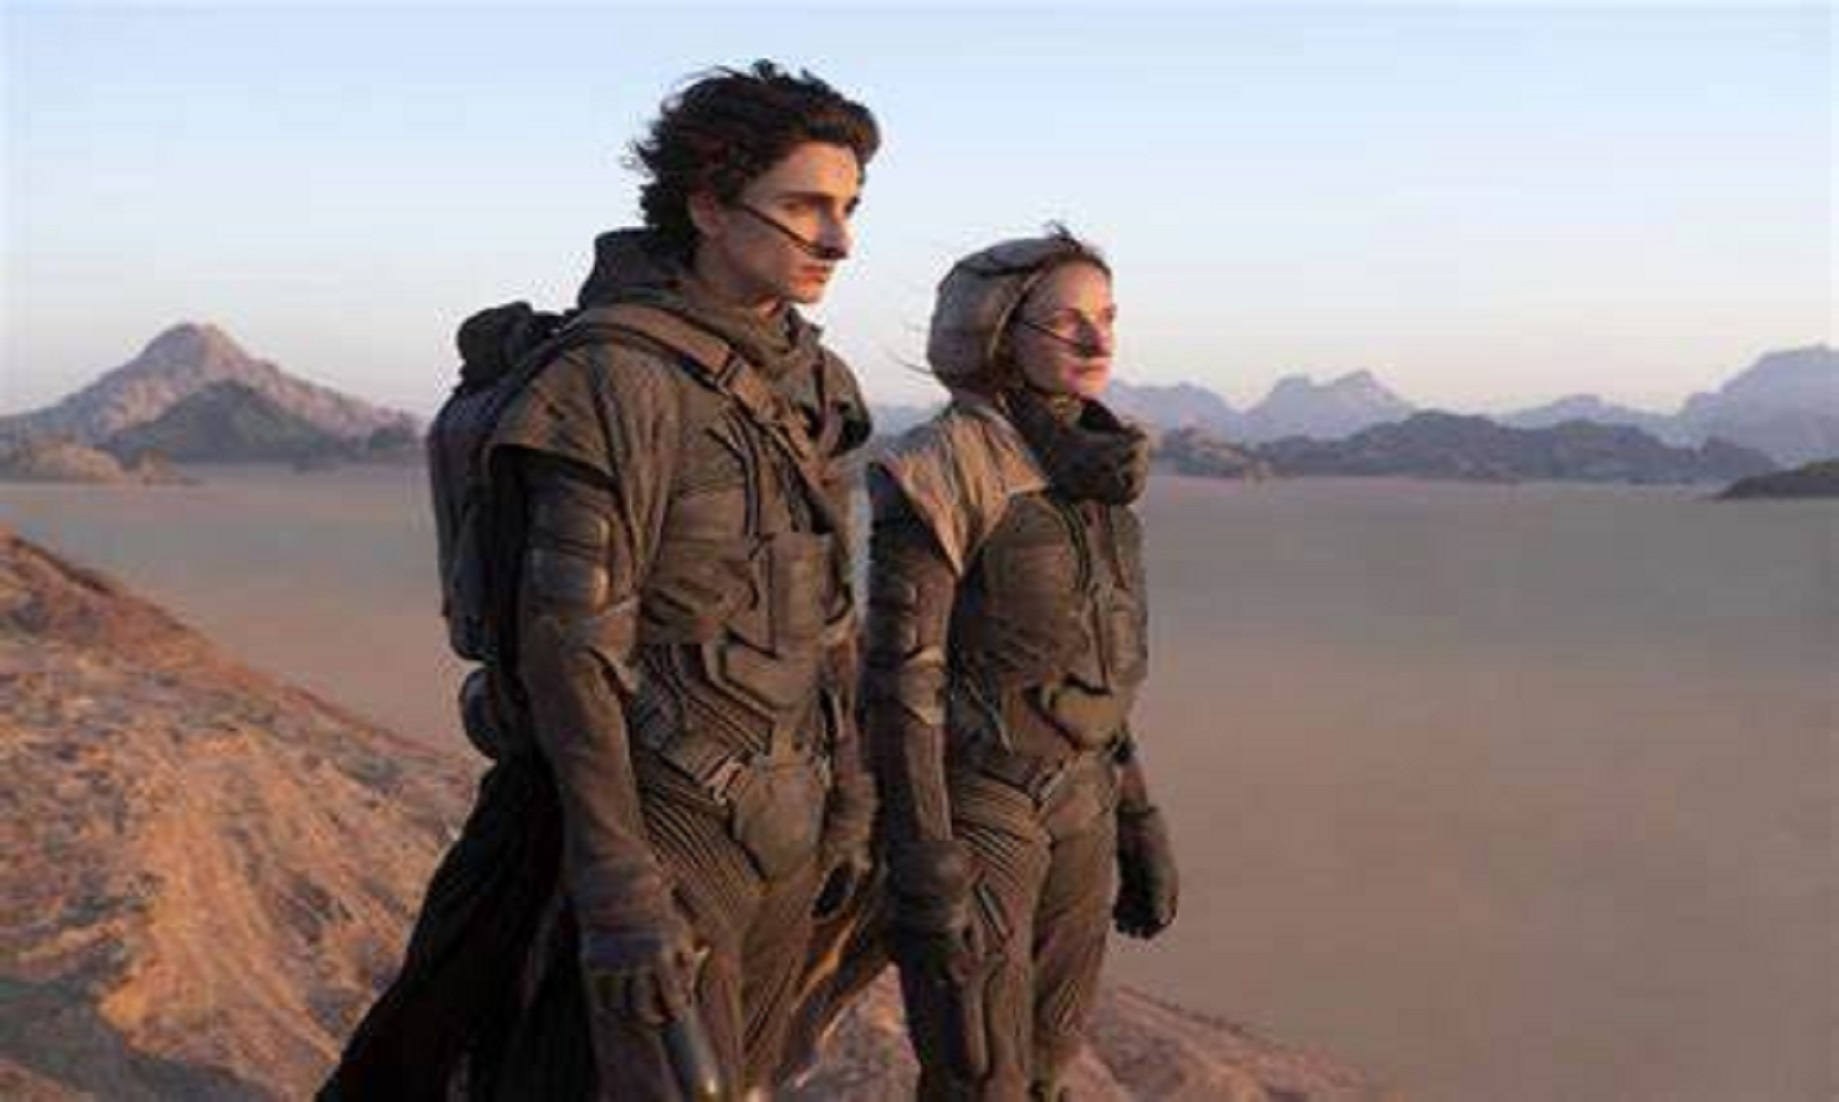 “Dune” Tops North American Box Office For Second Straight Weekend